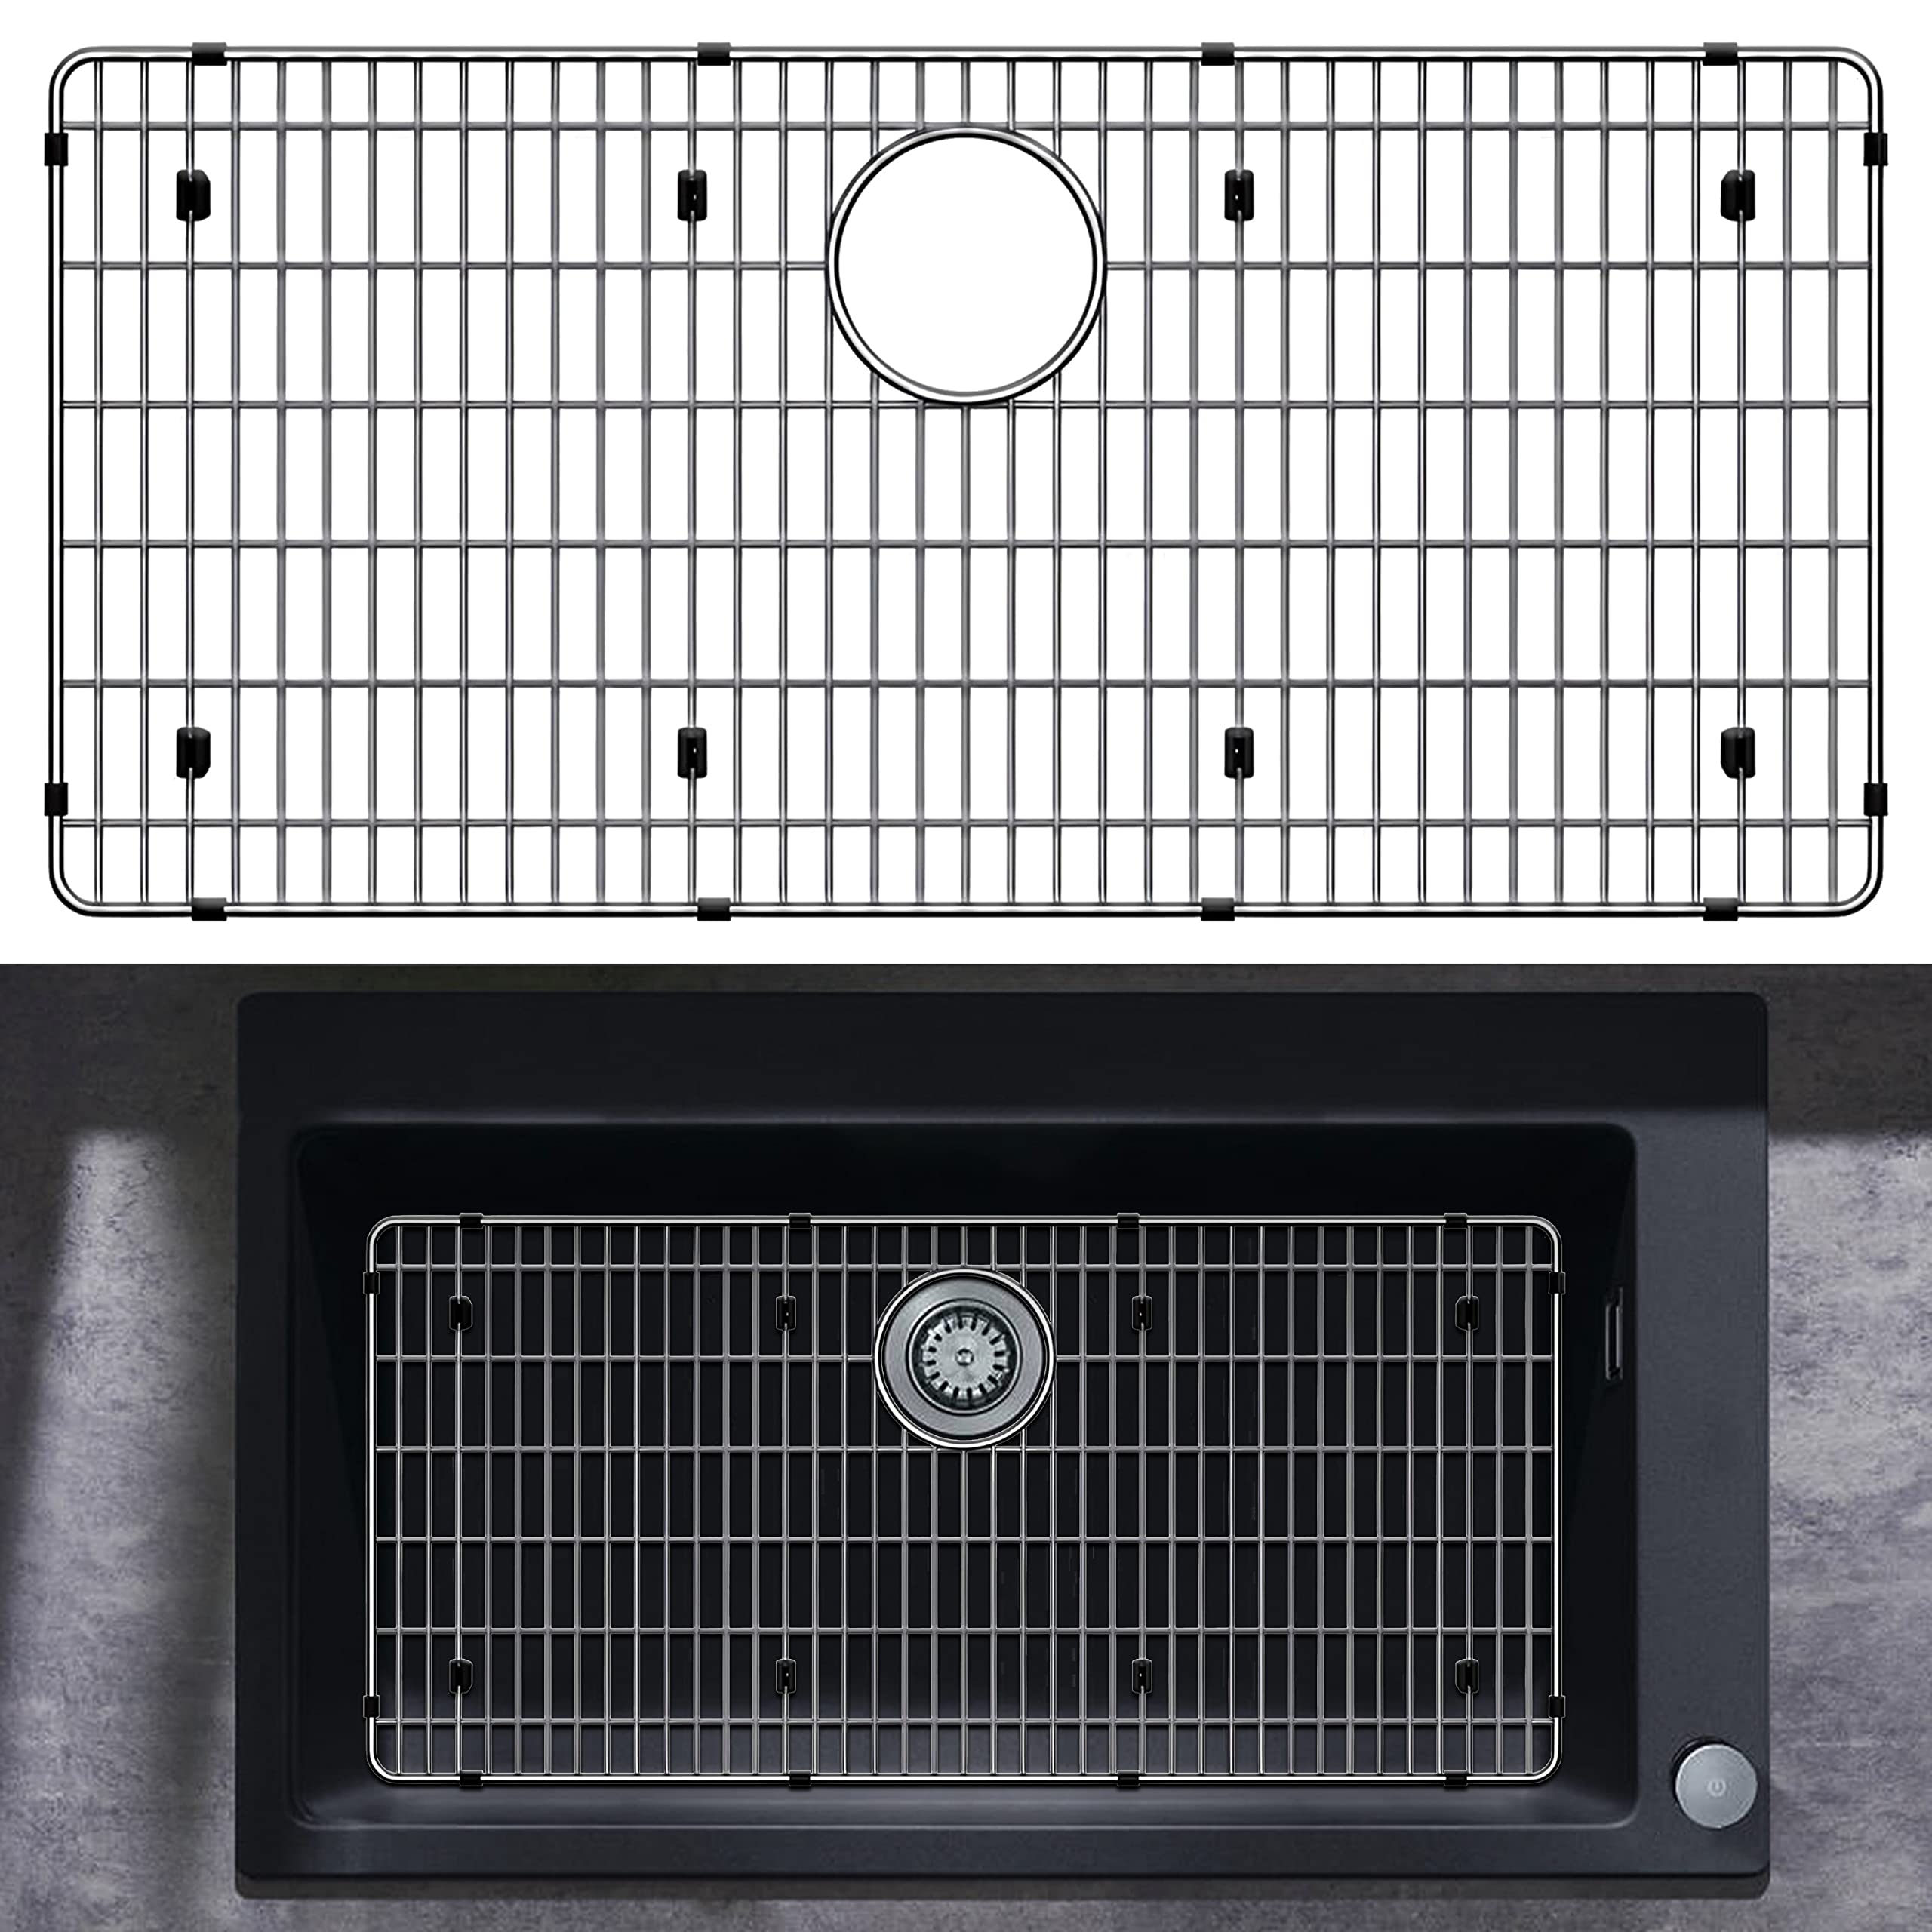 27-1/2" x 13-1/2" x 1-1/4" Sink Protectors for Kitchen Sink - Sink Bottom Grid - Stainless Steel Sink Protector - Sink Grate for Bottom of Kitchen Sink - Kitchen Sink Rack